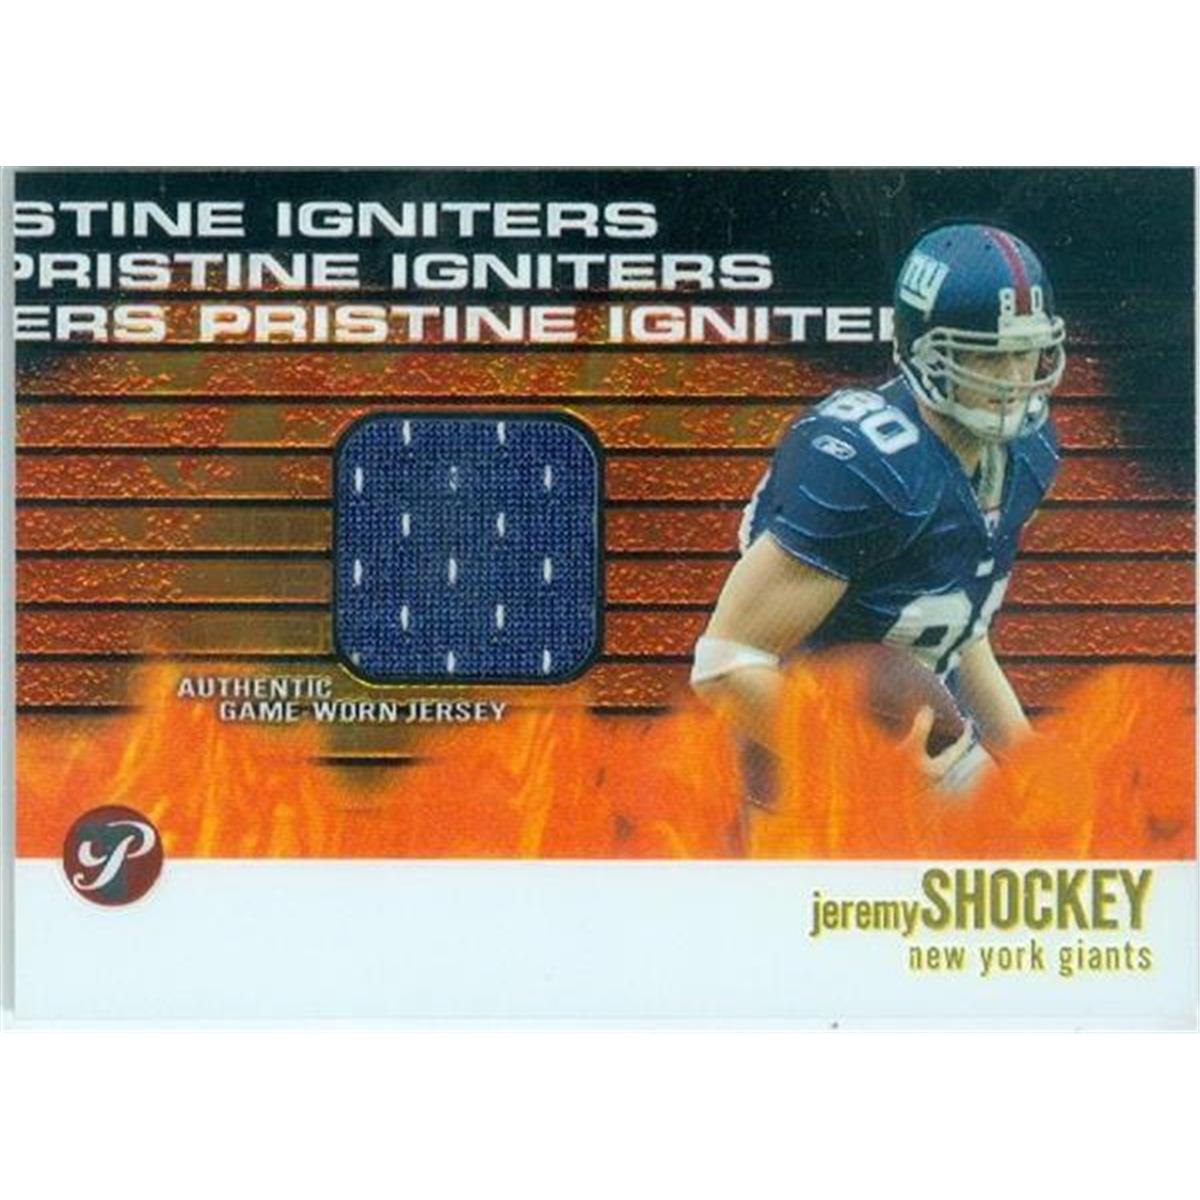 Picture of Autograph Warehouse 365397 Jeremy Shockey Player Worn Jersey Patch Football Card - New York Giants 2003 Topps Pristine Igniters No.PIJS